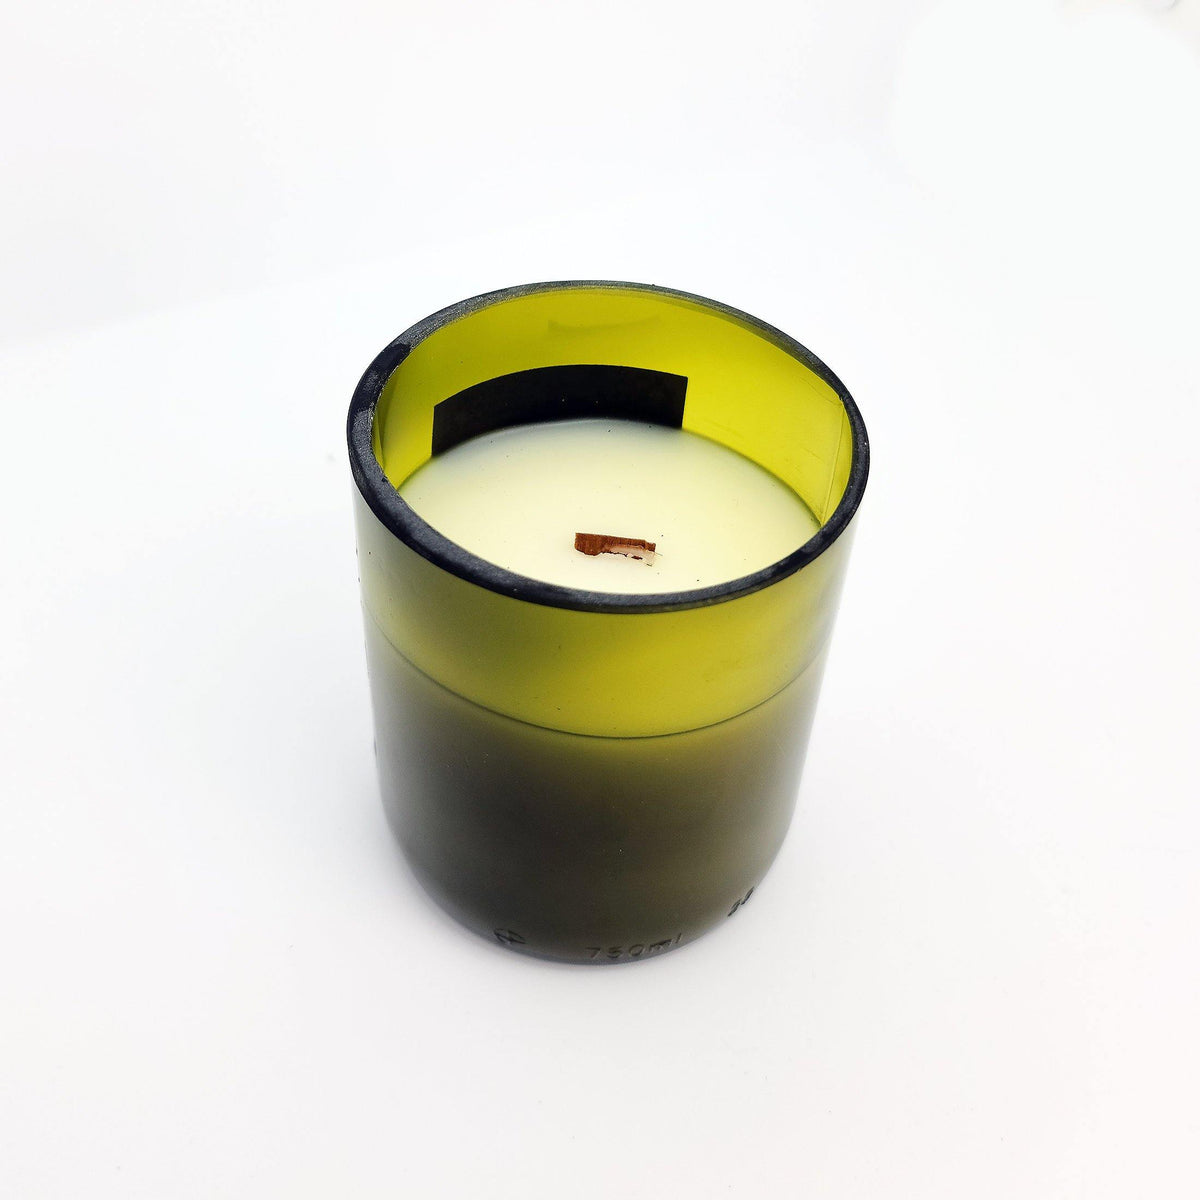 Dark Rose & Labdanum Wooden Wick Scented Candle - LUVOCANDLES - Scented Wooden Wick Handmade in Montreal